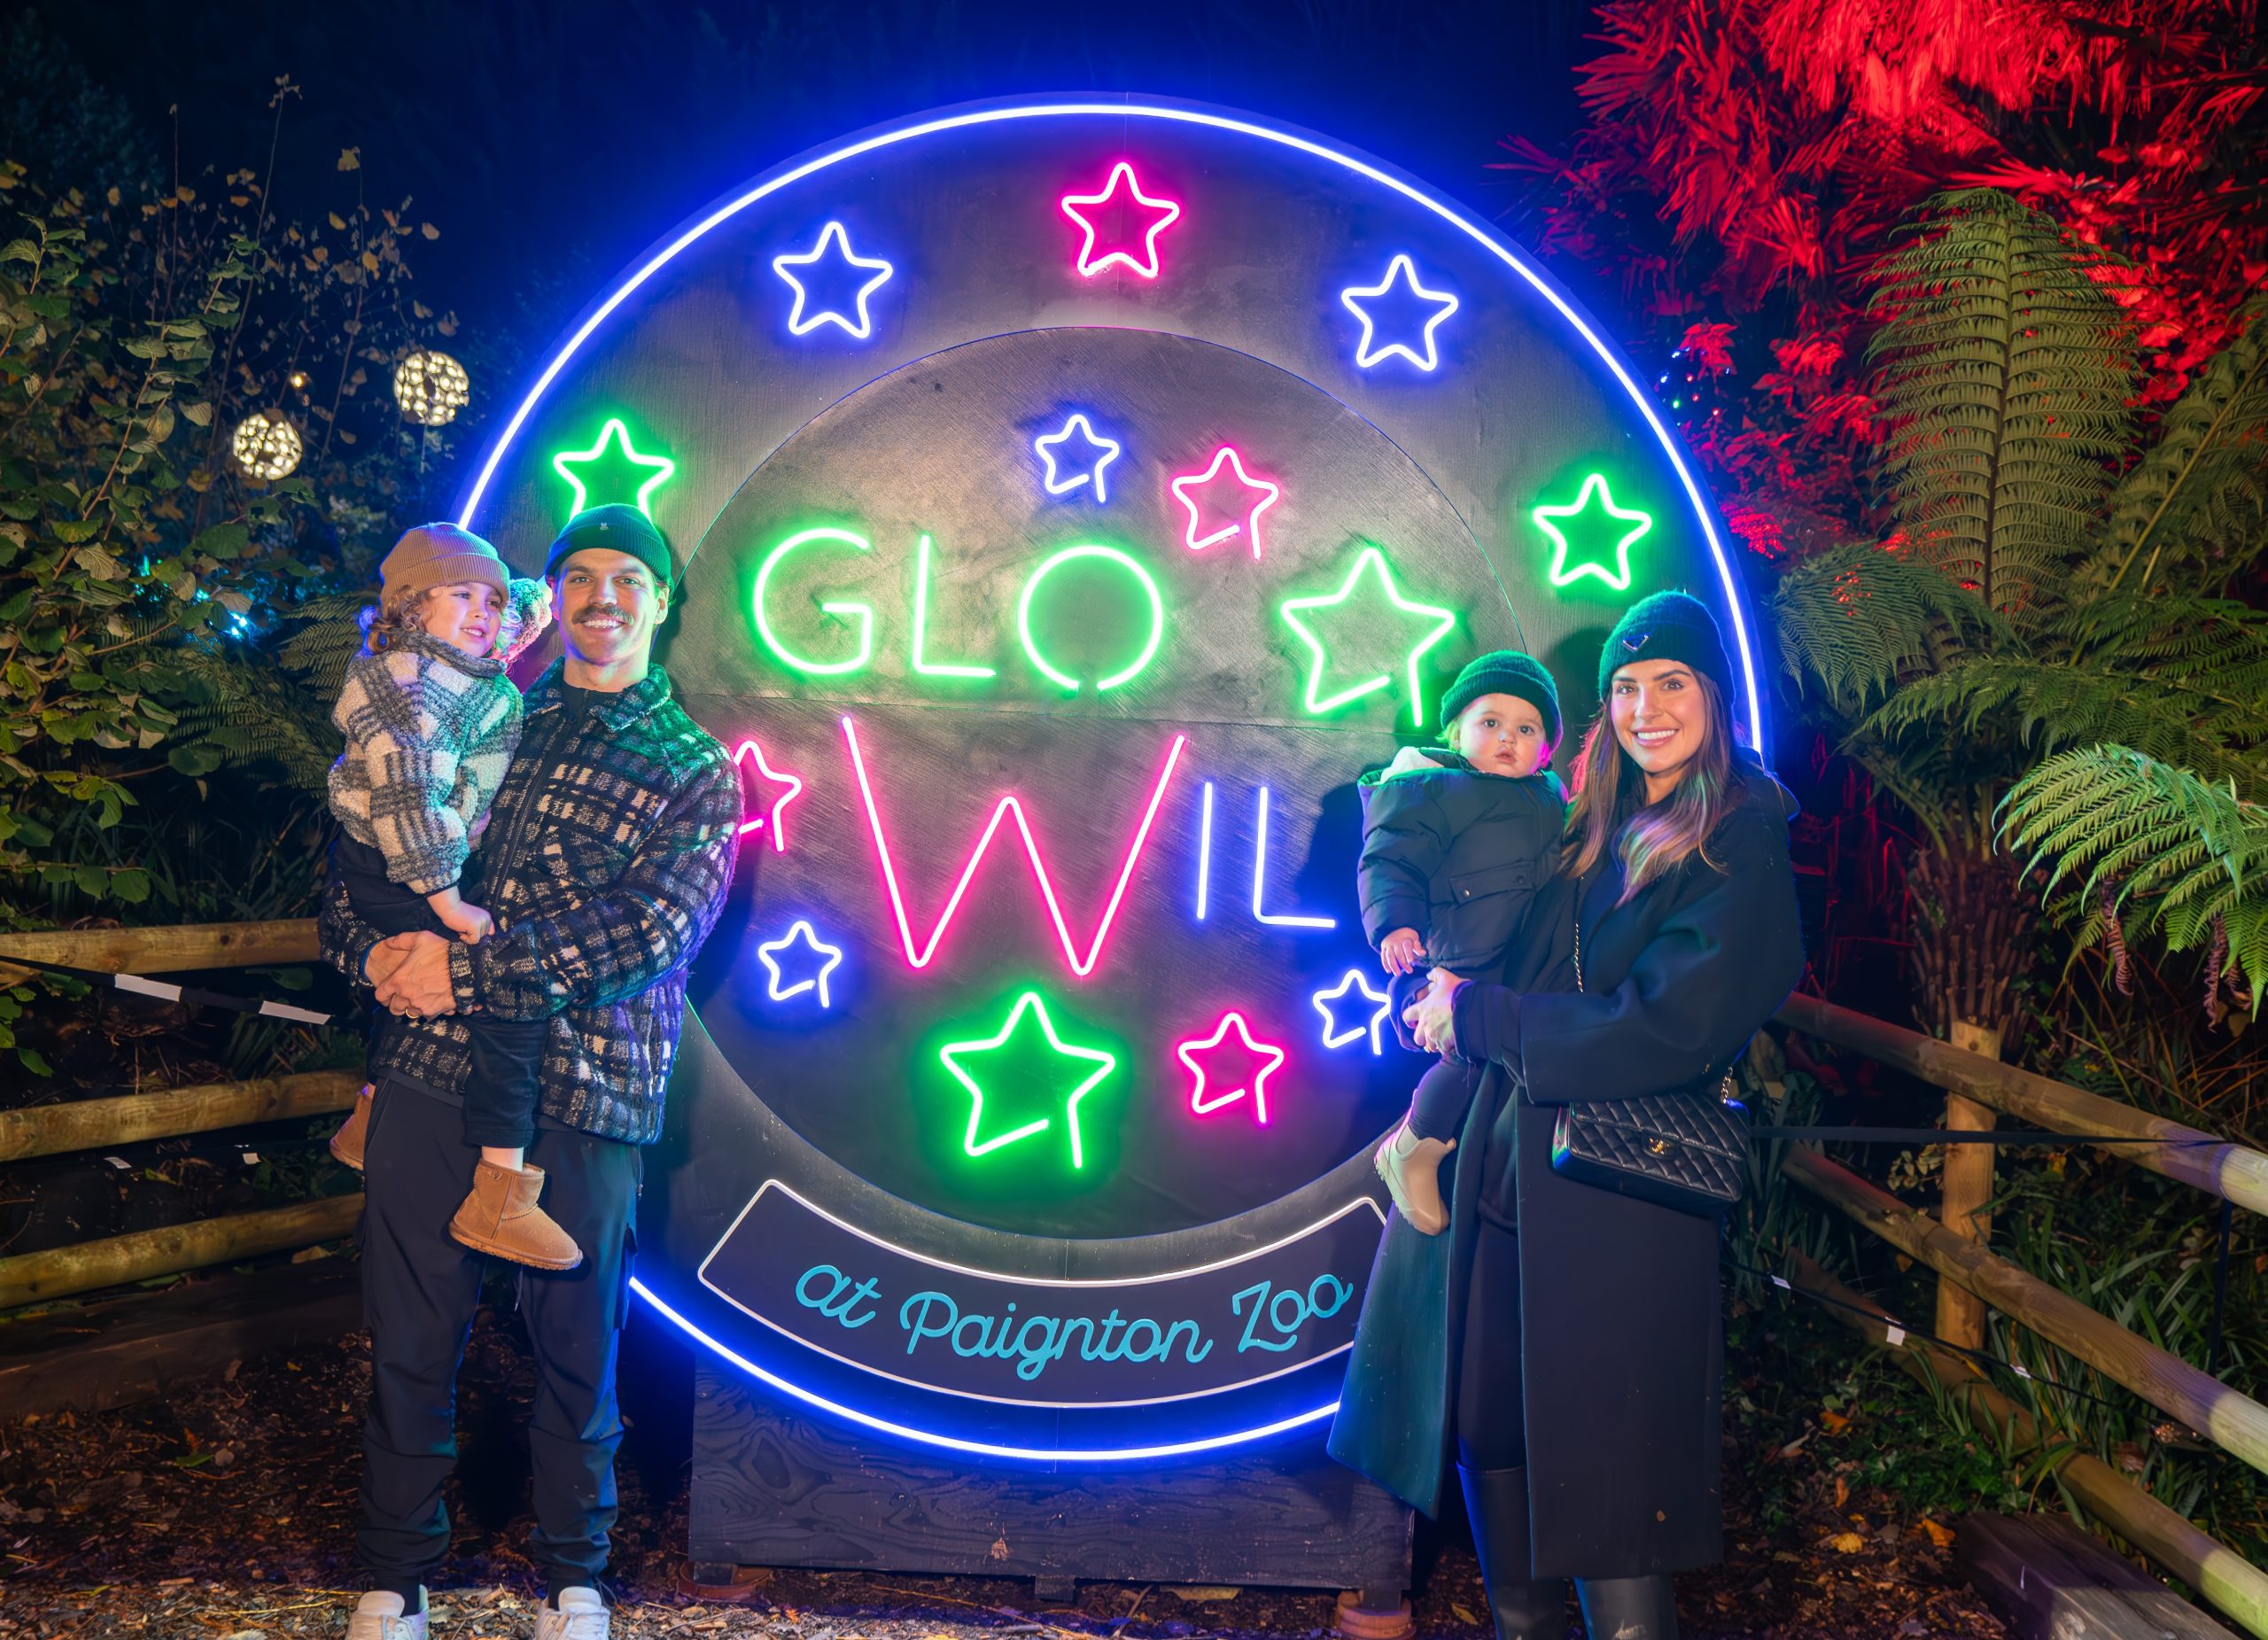 Glowing praise for opening night of GloWild at Paignton Zoo